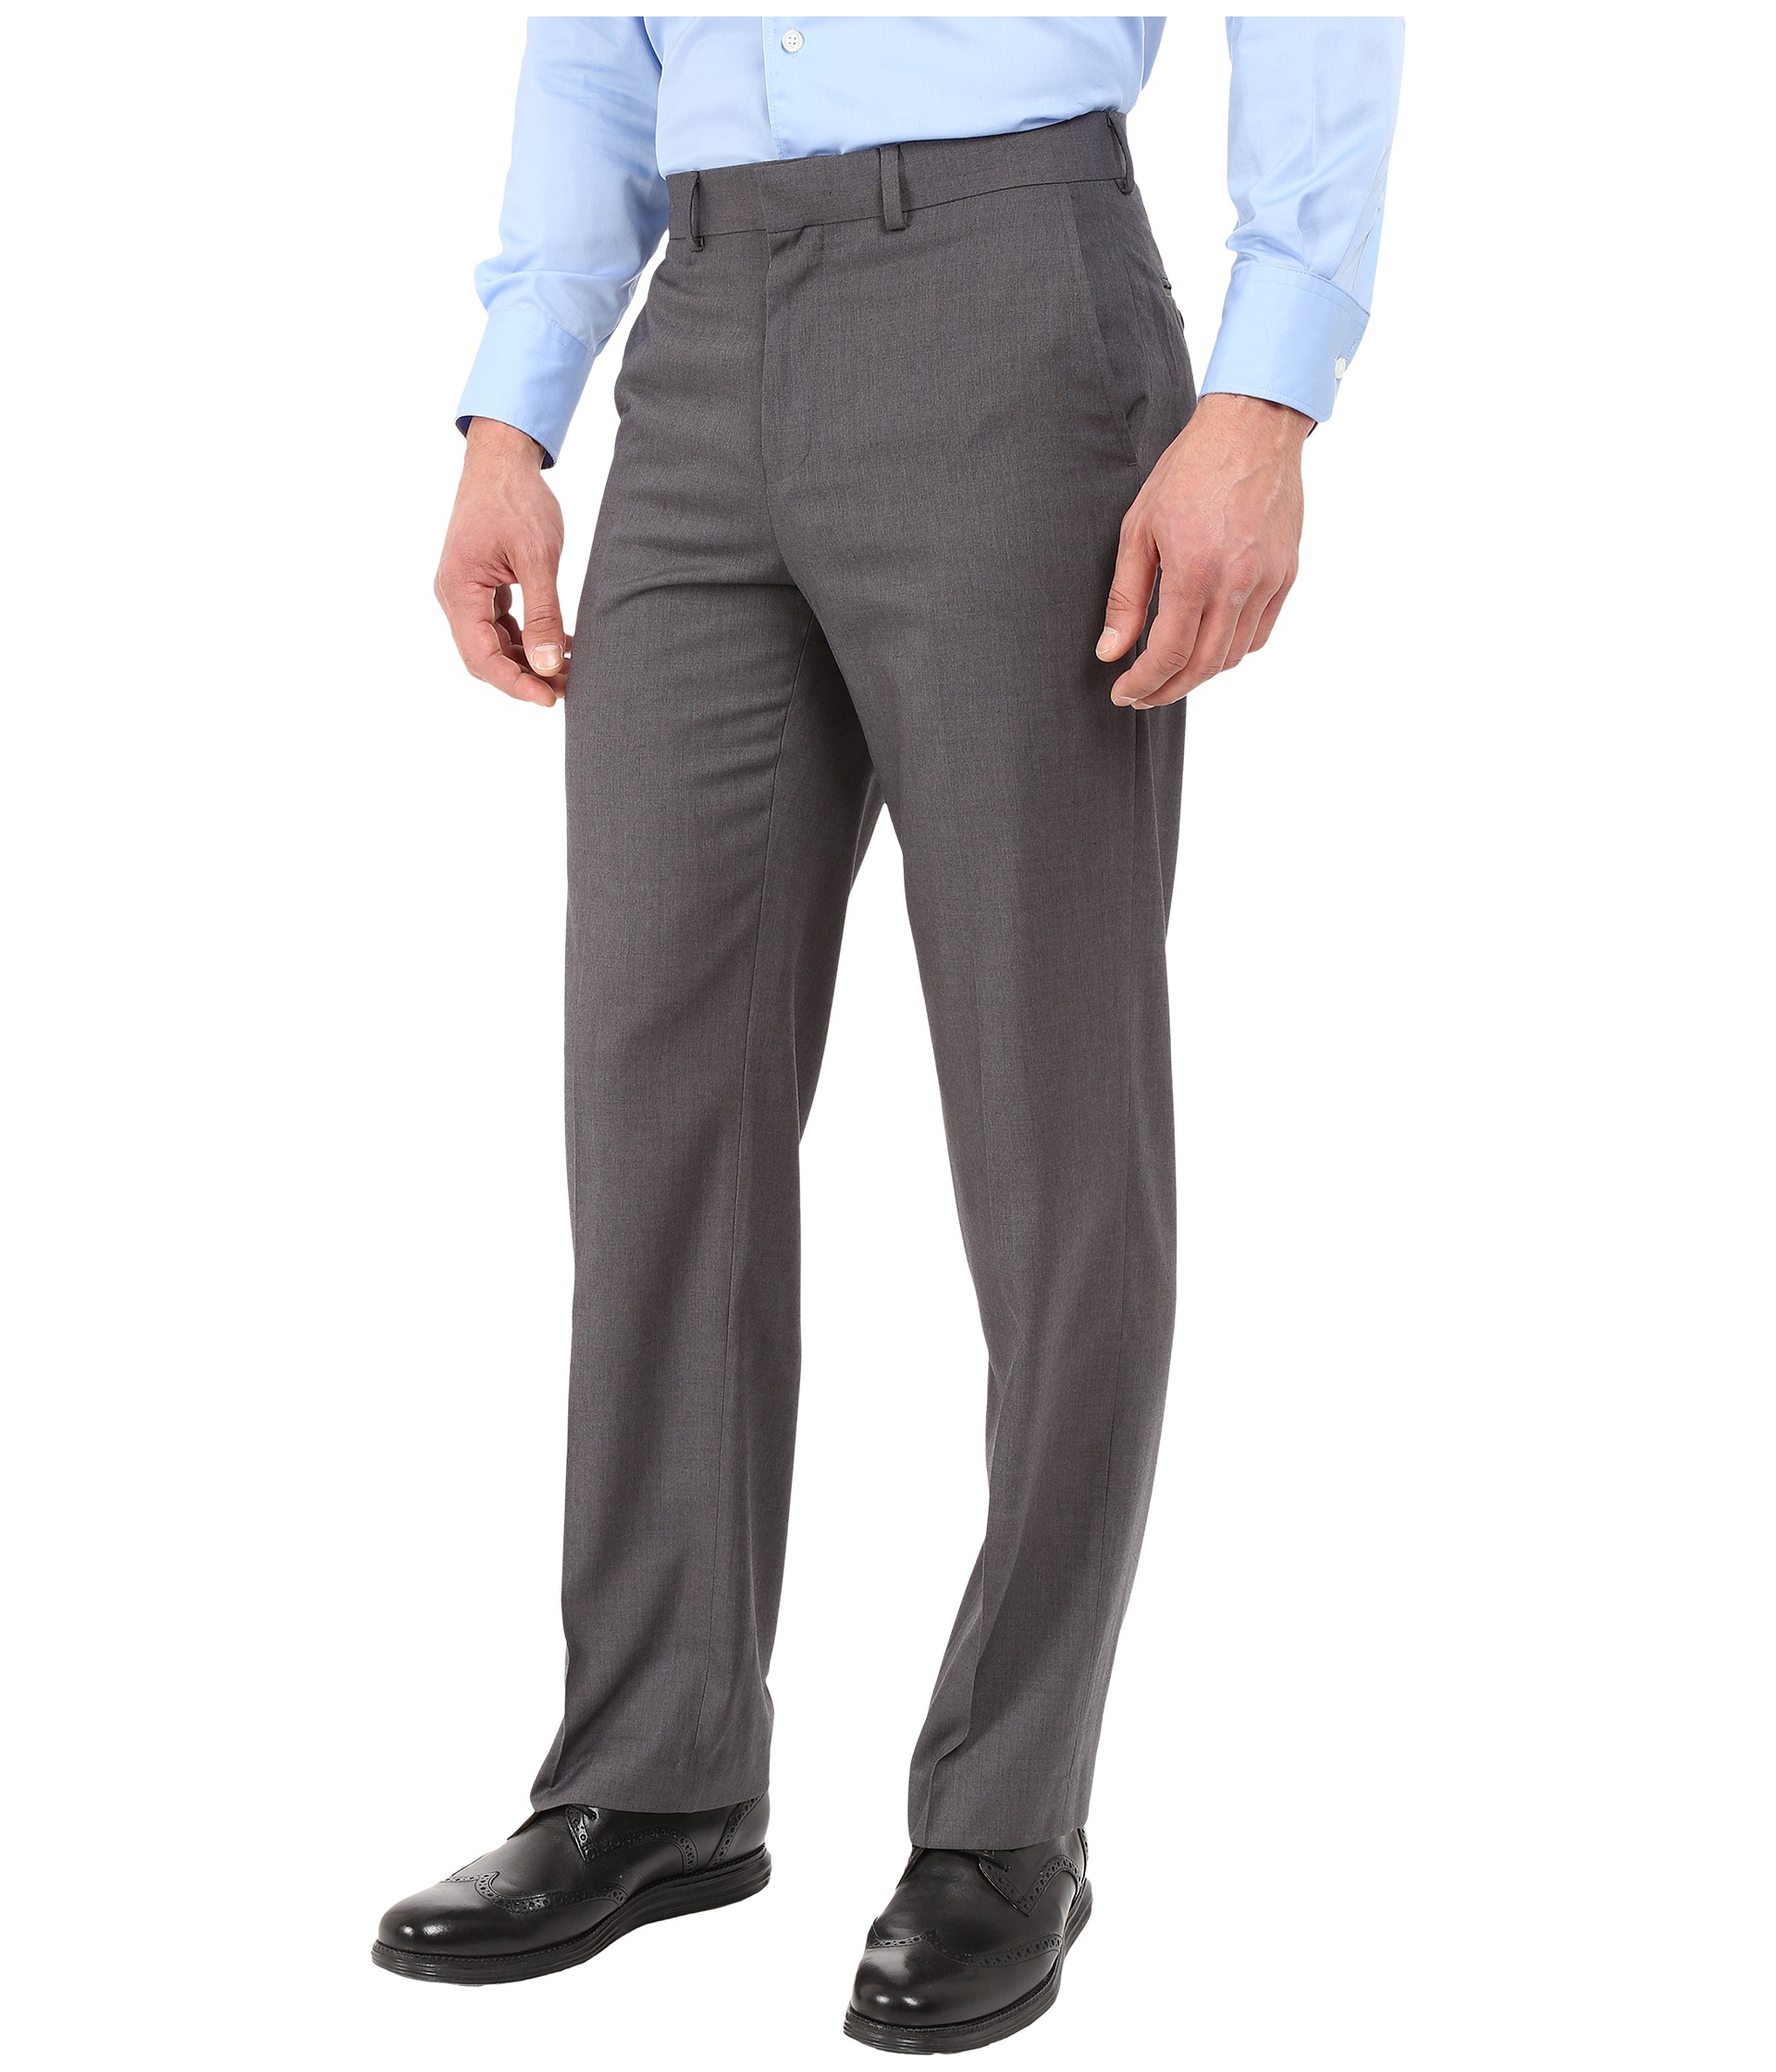 Dockers Flat Front Straight Fit Dress Pants at Zappos.com